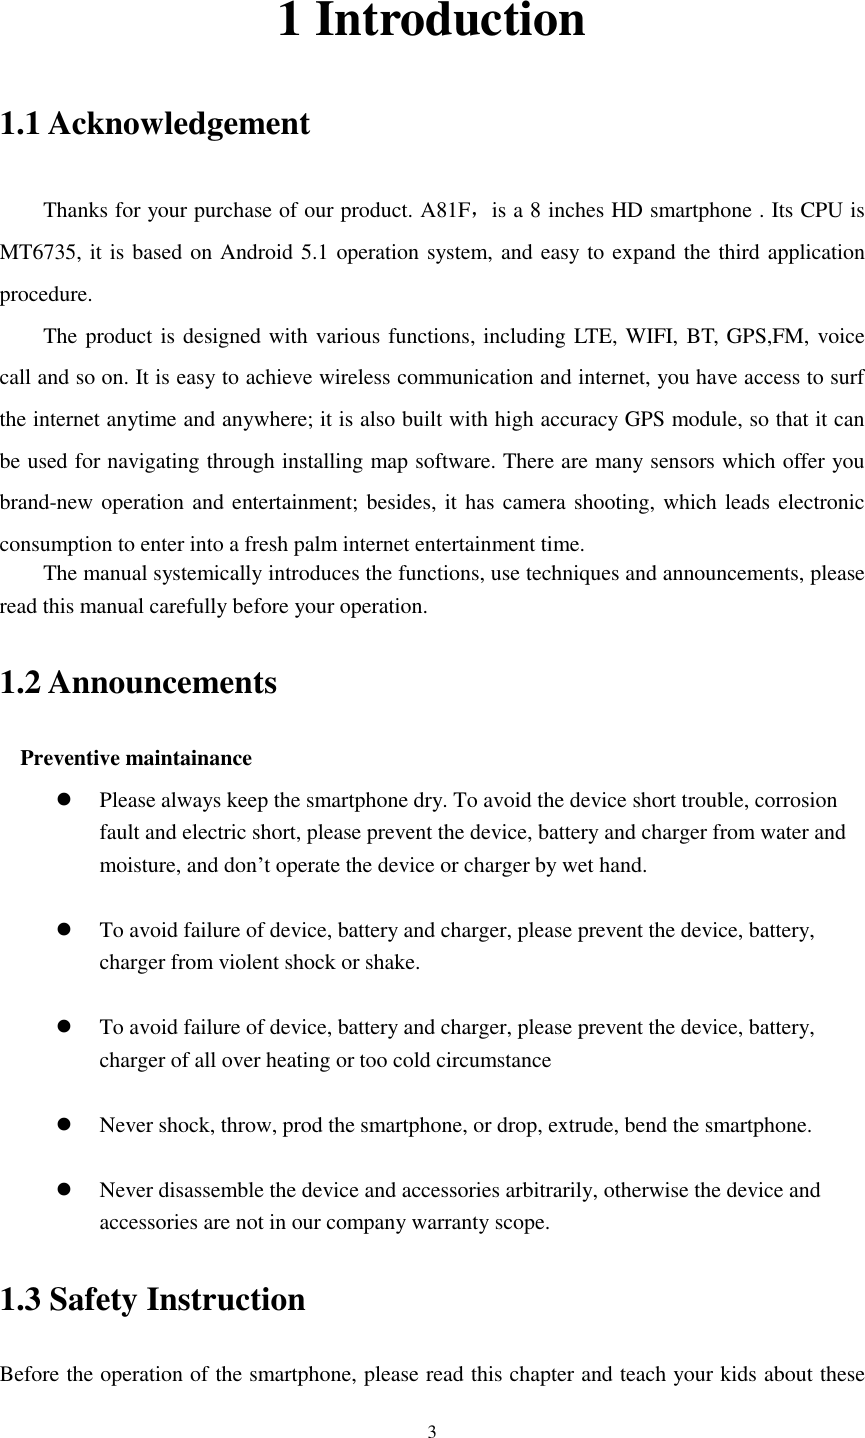      3 1 Introduction 1.1 Acknowledgement     Thanks for your purchase of our product. A81F，is a 8 inches HD smartphone . Its CPU is MT6735, it is based on Android 5.1 operation system, and easy to expand the third application procedure. The product is designed with various functions, including LTE, WIFI, BT, GPS,FM, voice call and so on. It is easy to achieve wireless communication and internet, you have access to surf the internet anytime and anywhere; it is also built with high accuracy GPS module, so that it can be used for navigating through installing map software. There are many sensors which offer you brand-new operation and entertainment; besides, it has camera shooting, which leads electronic consumption to enter into a fresh palm internet entertainment time.   The manual systemically introduces the functions, use techniques and announcements, please read this manual carefully before your operation. 1.2 Announcements   Preventive maintainance    Please always keep the smartphone dry. To avoid the device short trouble, corrosion fault and electric short, please prevent the device, battery and charger from water and moisture, and don’t operate the device or charger by wet hand.     To avoid failure of device, battery and charger, please prevent the device, battery, charger from violent shock or shake.   To avoid failure of device, battery and charger, please prevent the device, battery, charger of all over heating or too cold circumstance   Never shock, throw, prod the smartphone, or drop, extrude, bend the smartphone.   Never disassemble the device and accessories arbitrarily, otherwise the device and accessories are not in our company warranty scope. 1.3 Safety Instruction     Before the operation of the smartphone, please read this chapter and teach your kids about these 